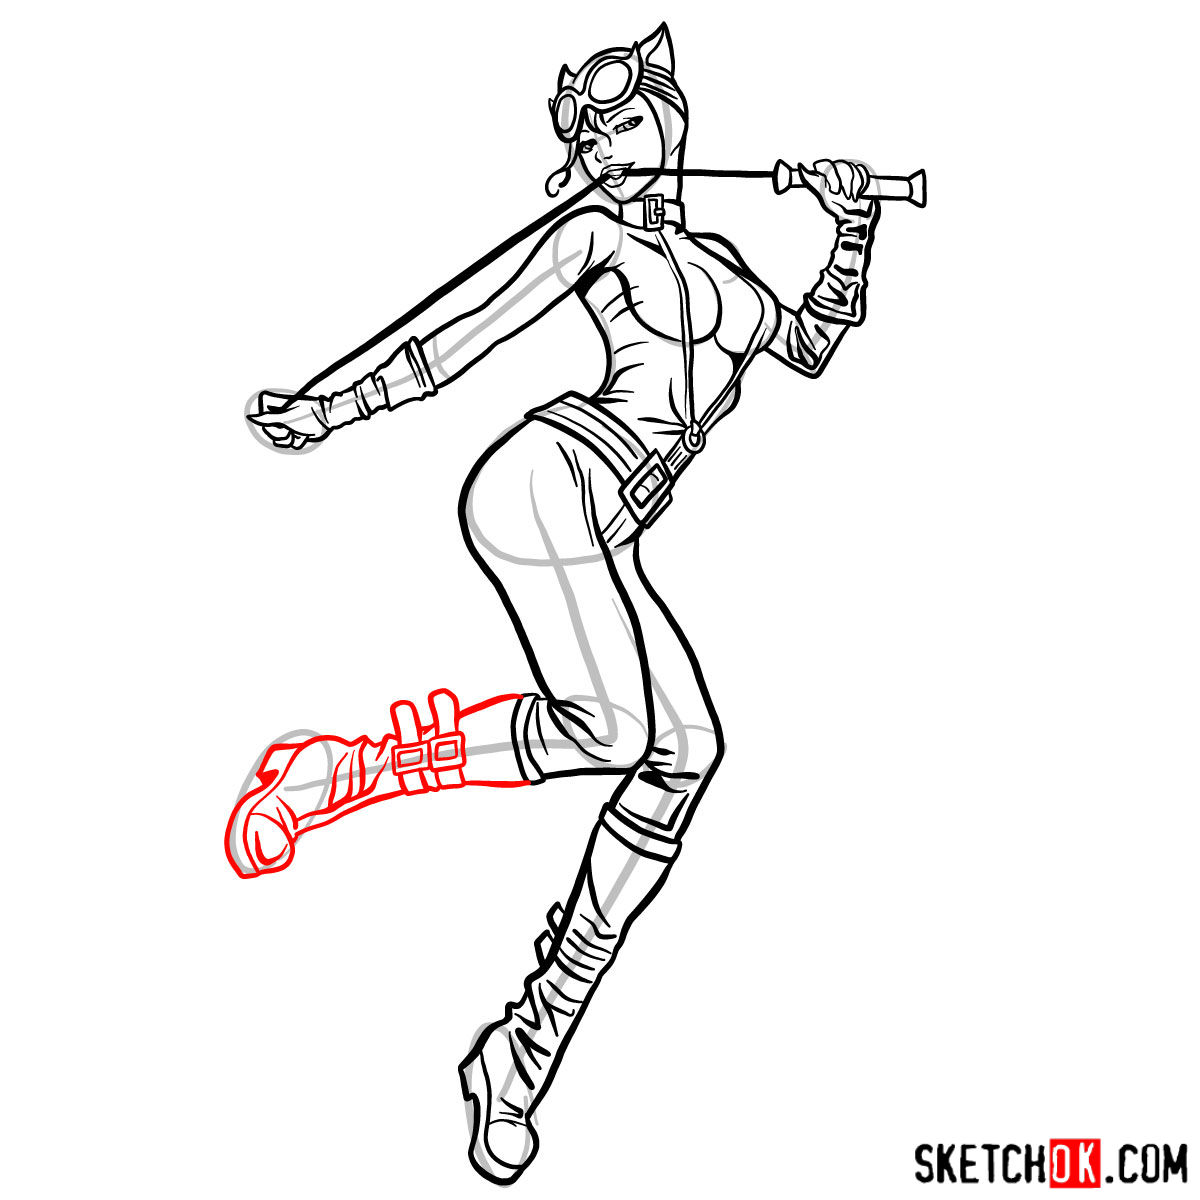 How to draw Catwoman superheroine from DC Comics - step 16